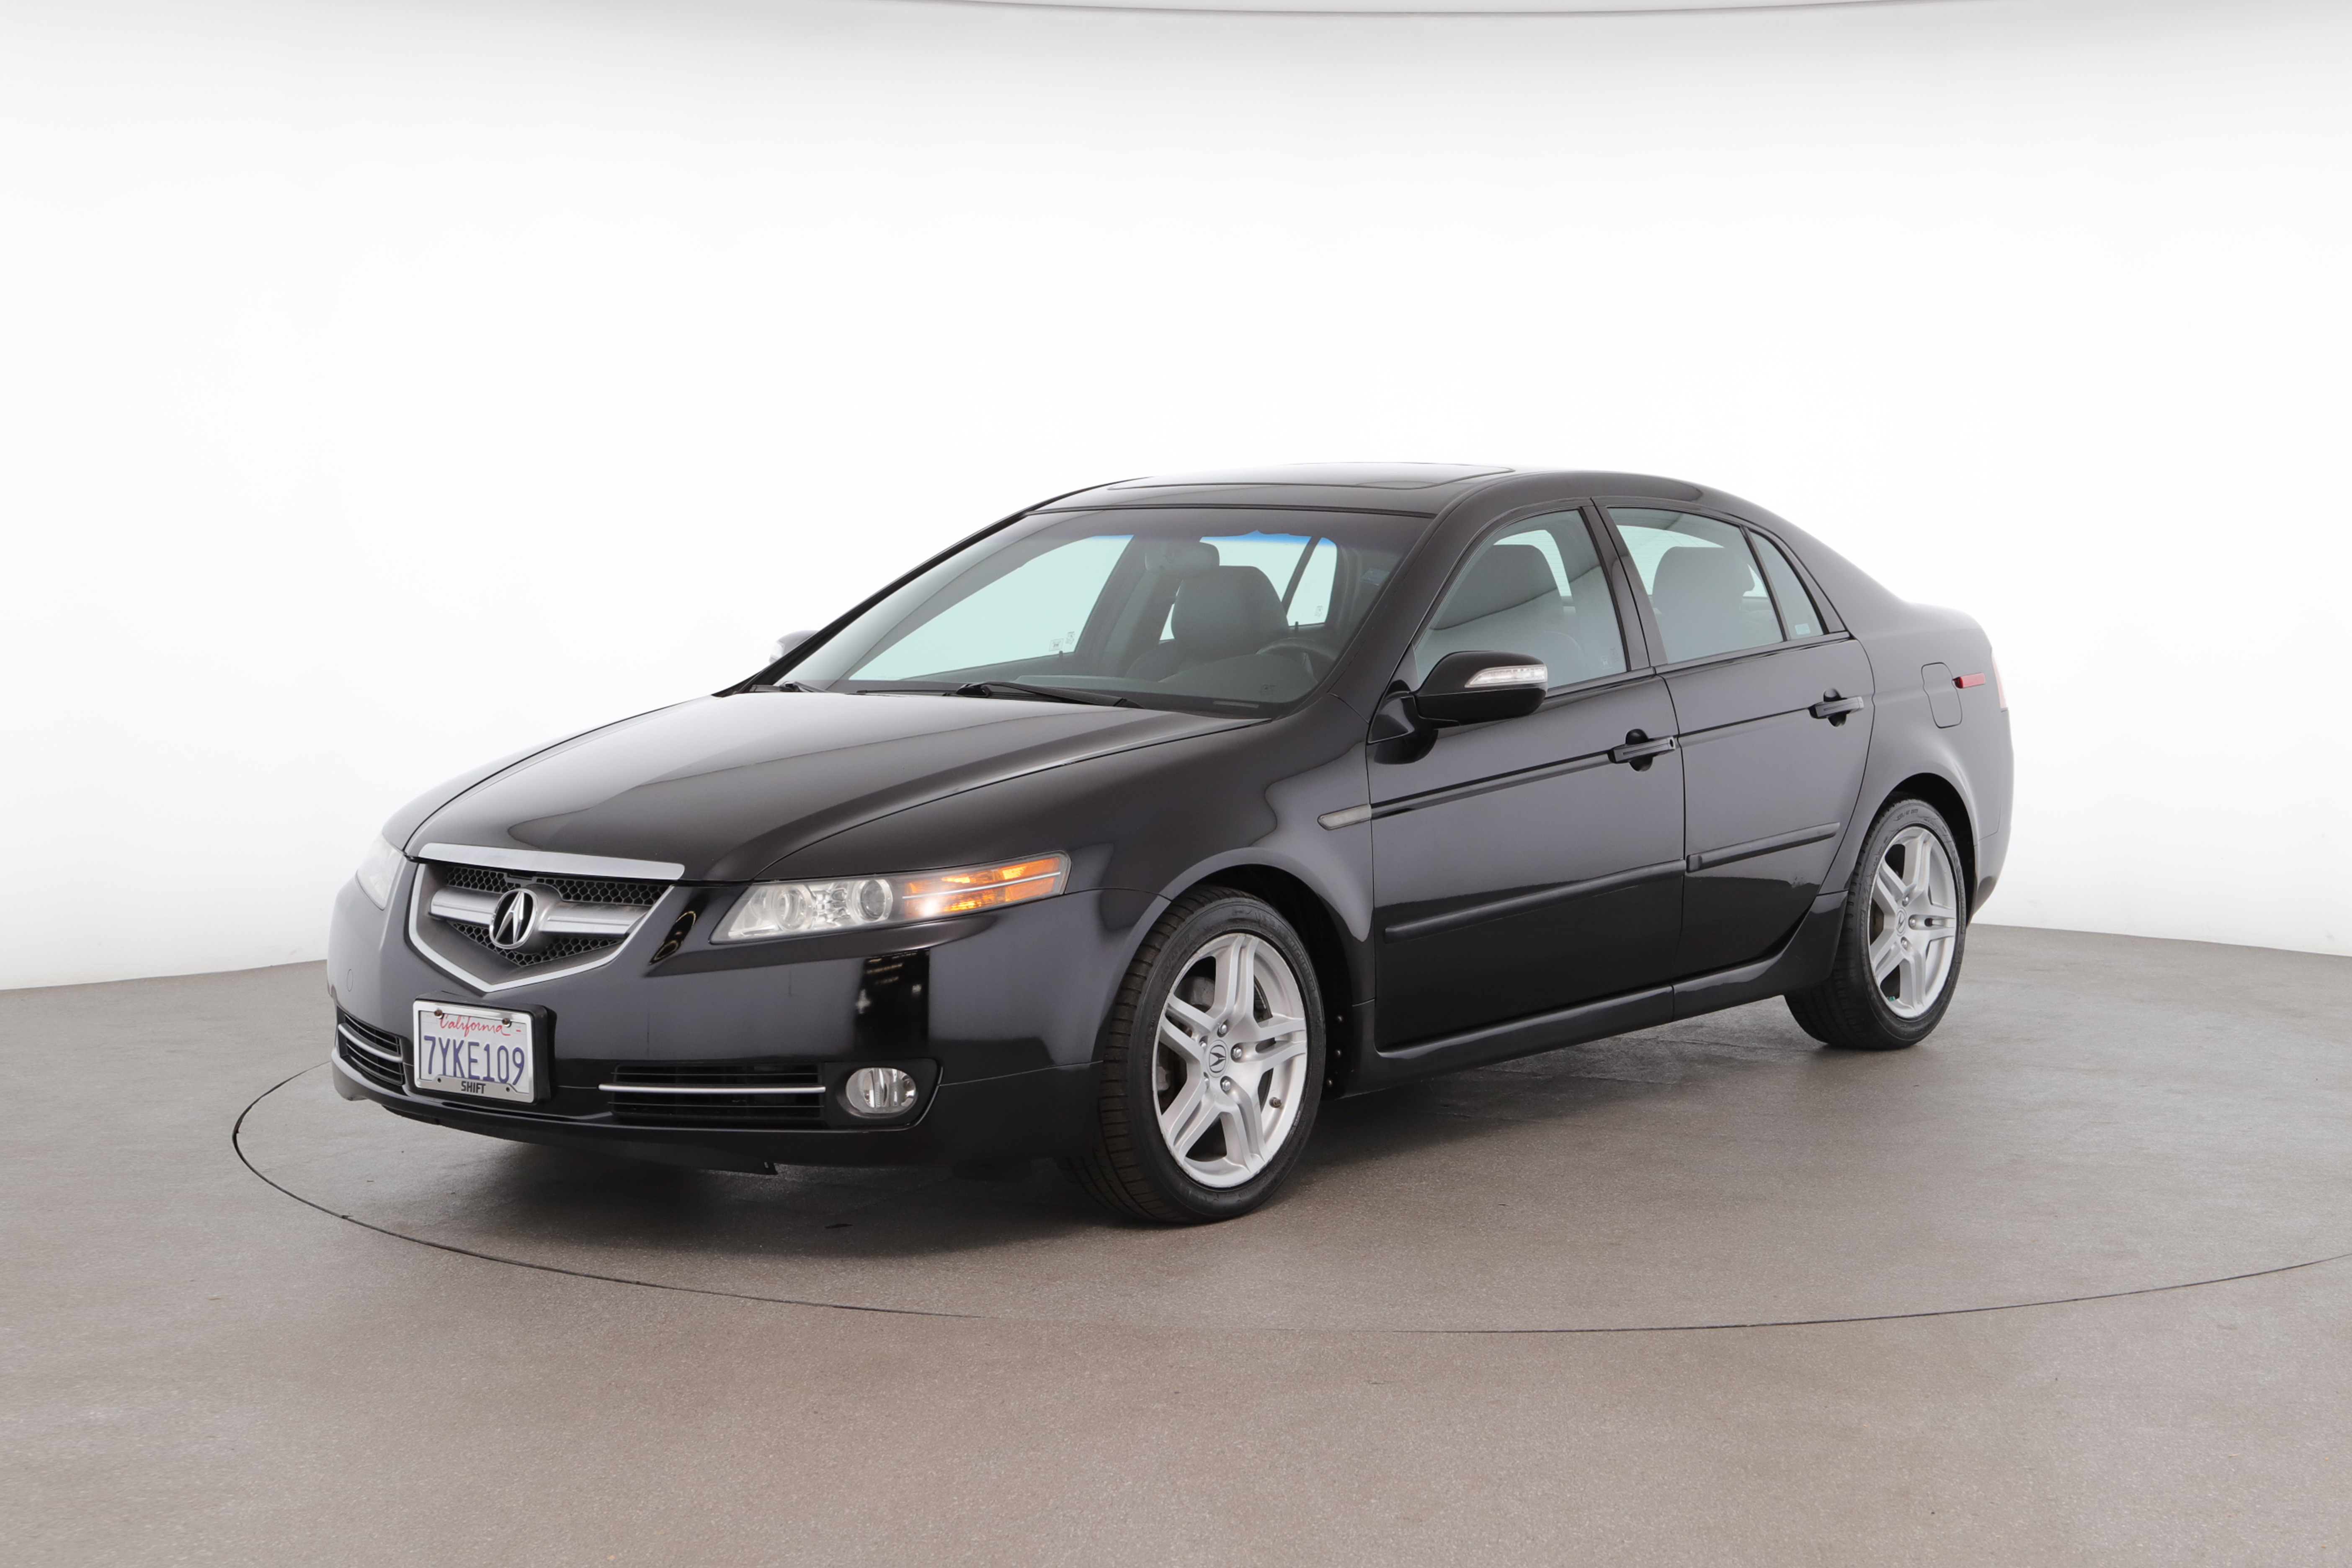 Used 2008 Black Acura TL for $11,950